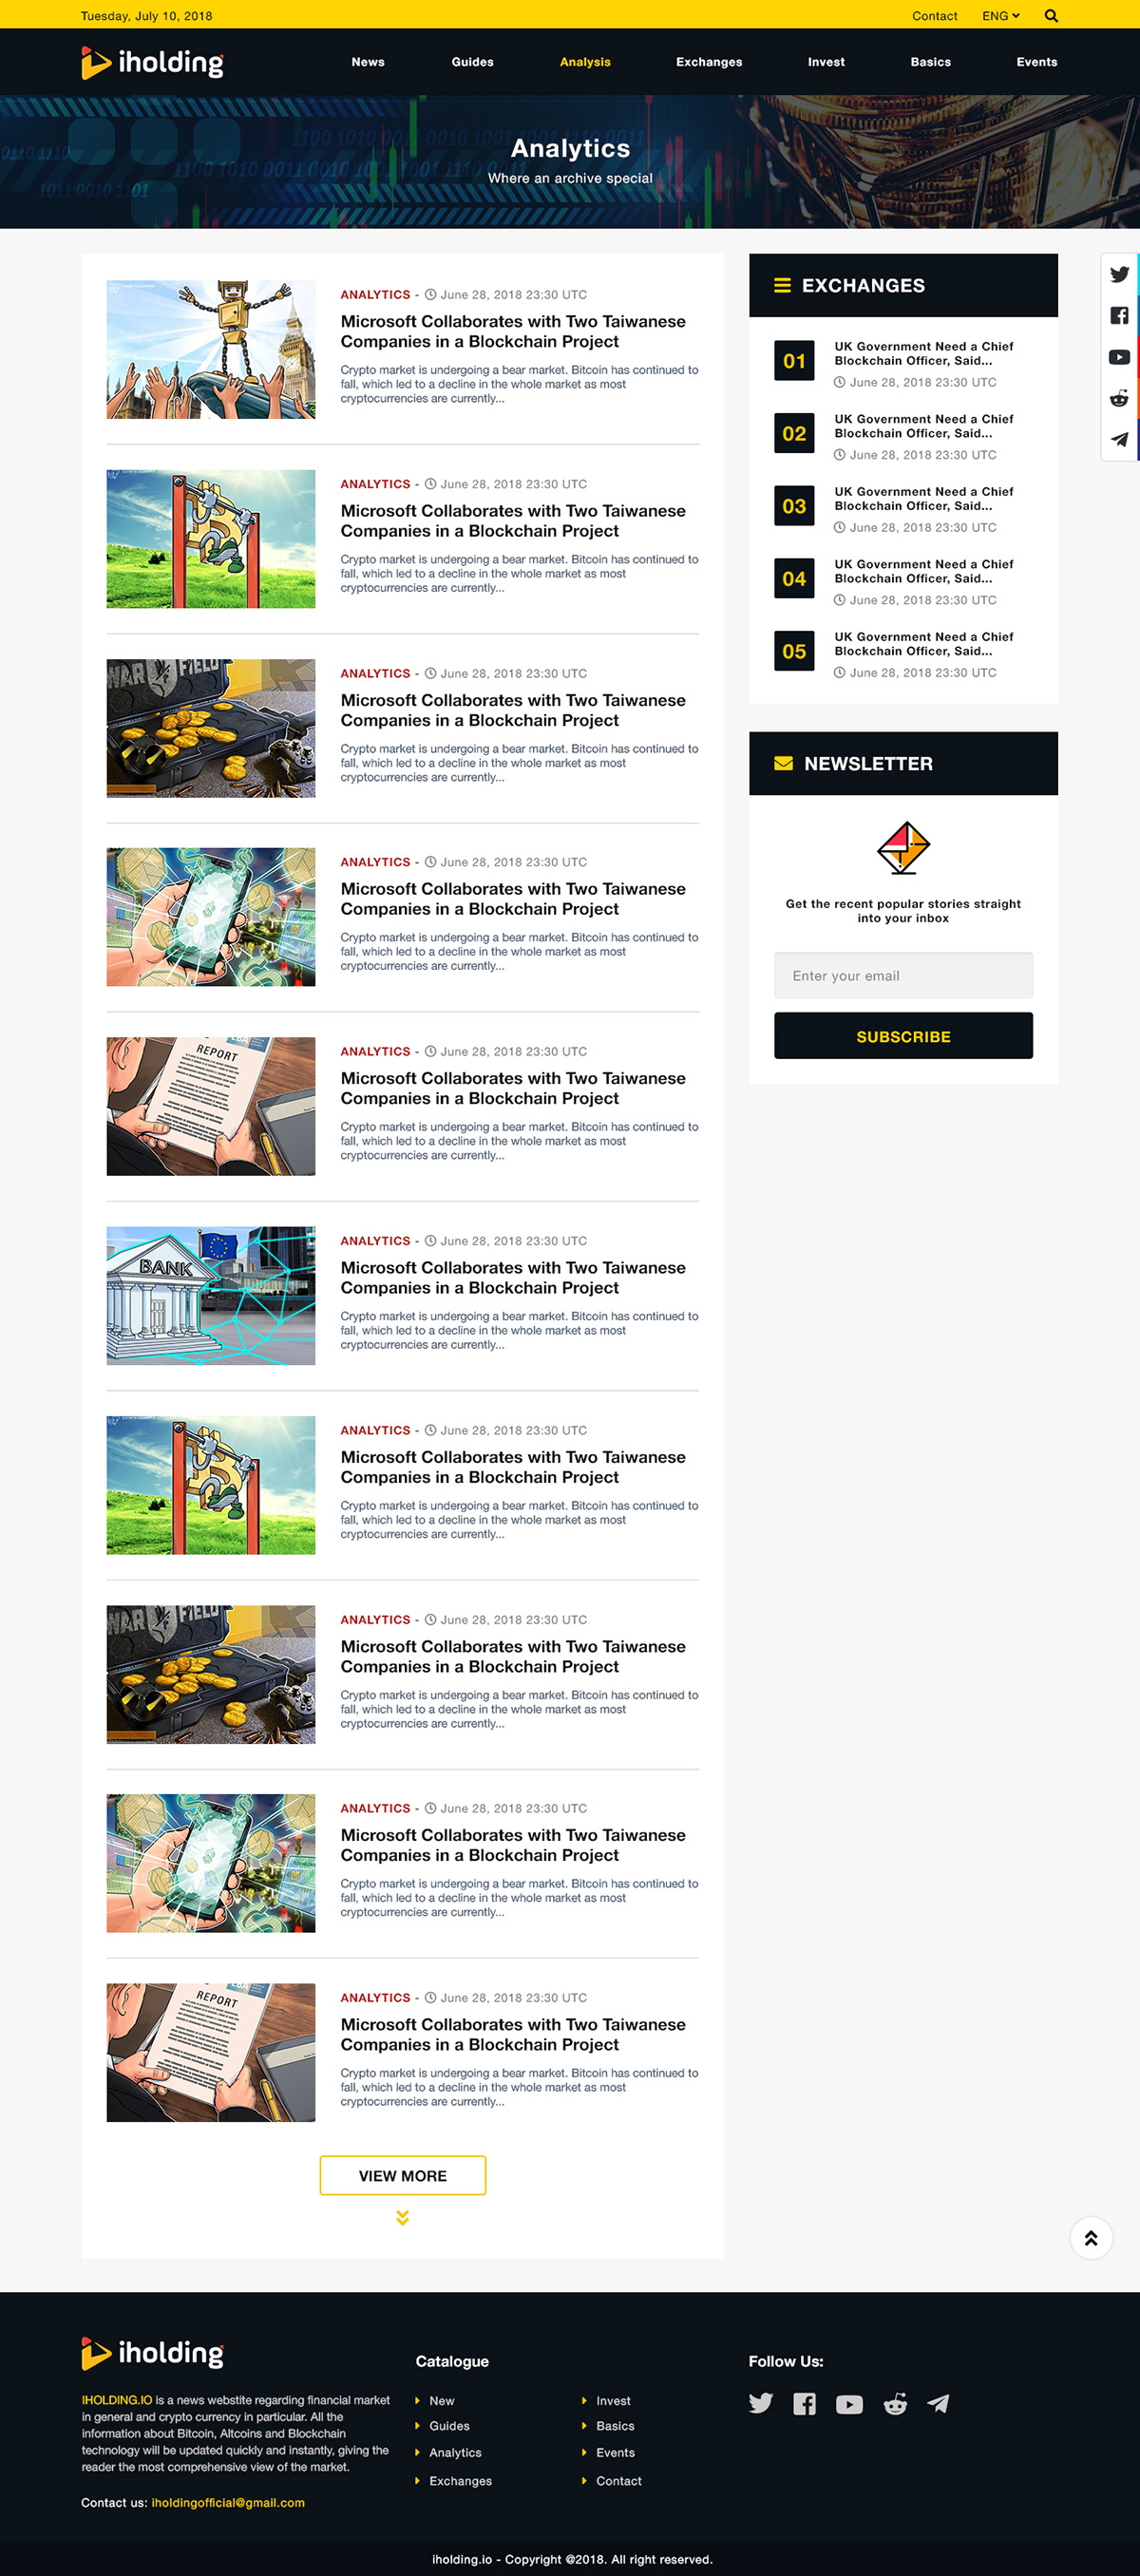 Template Bitcoin News Website For Iholding Company on Behance